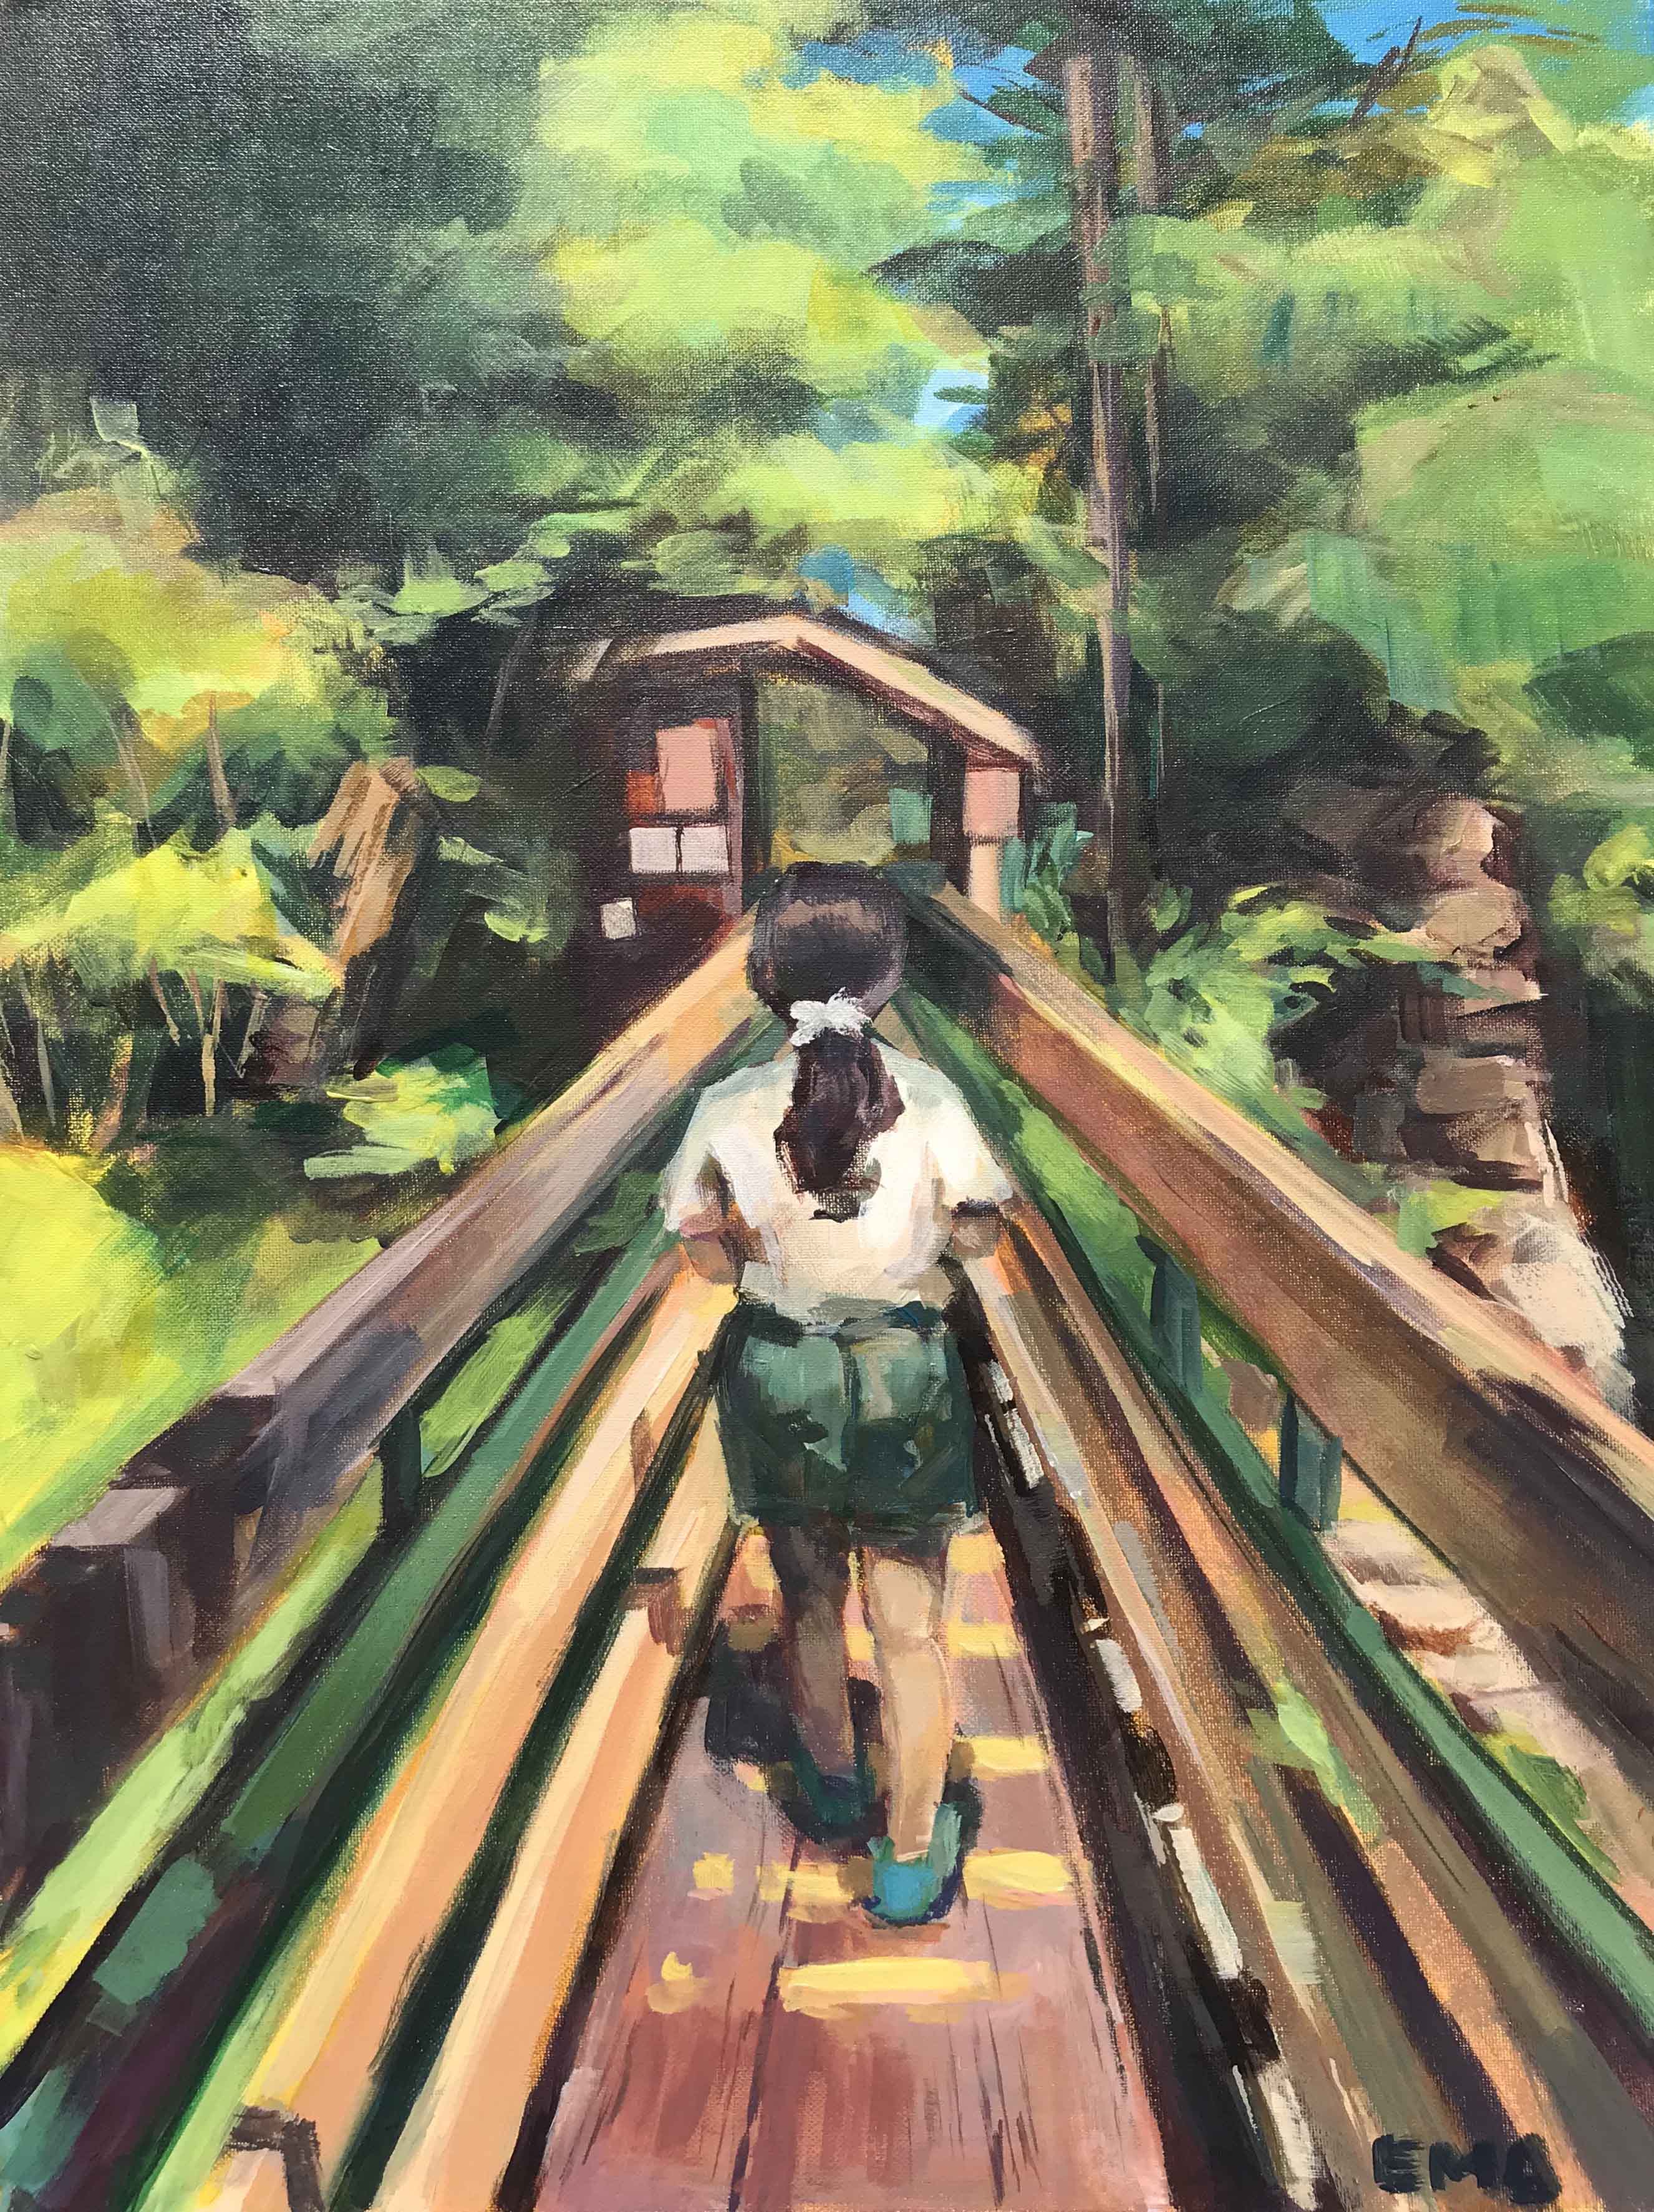 A painting of a woman on a wooden pedestrian bridge